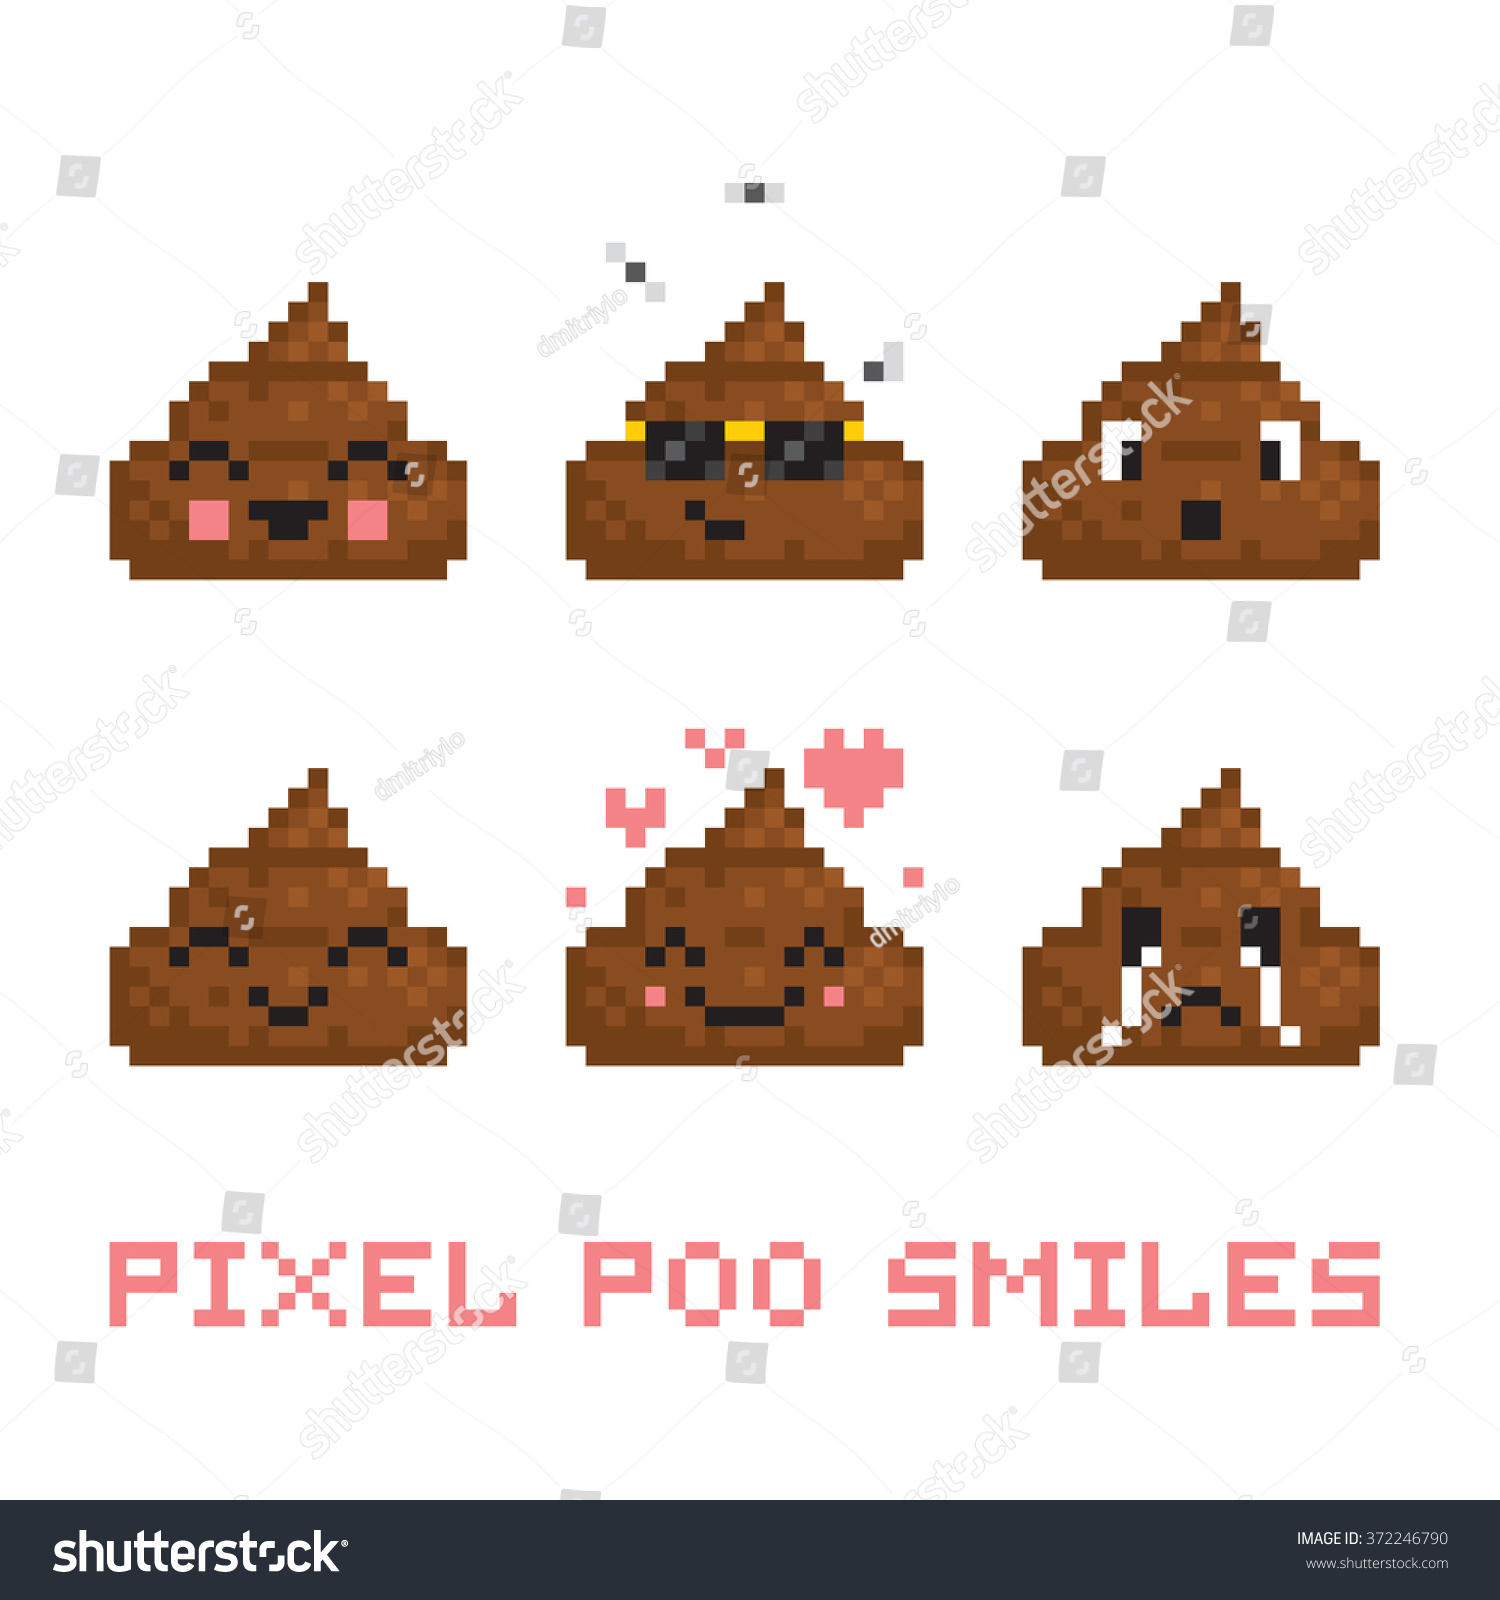 Pixel Art Style Poo Smile Vector Stock Vector Royalty Free